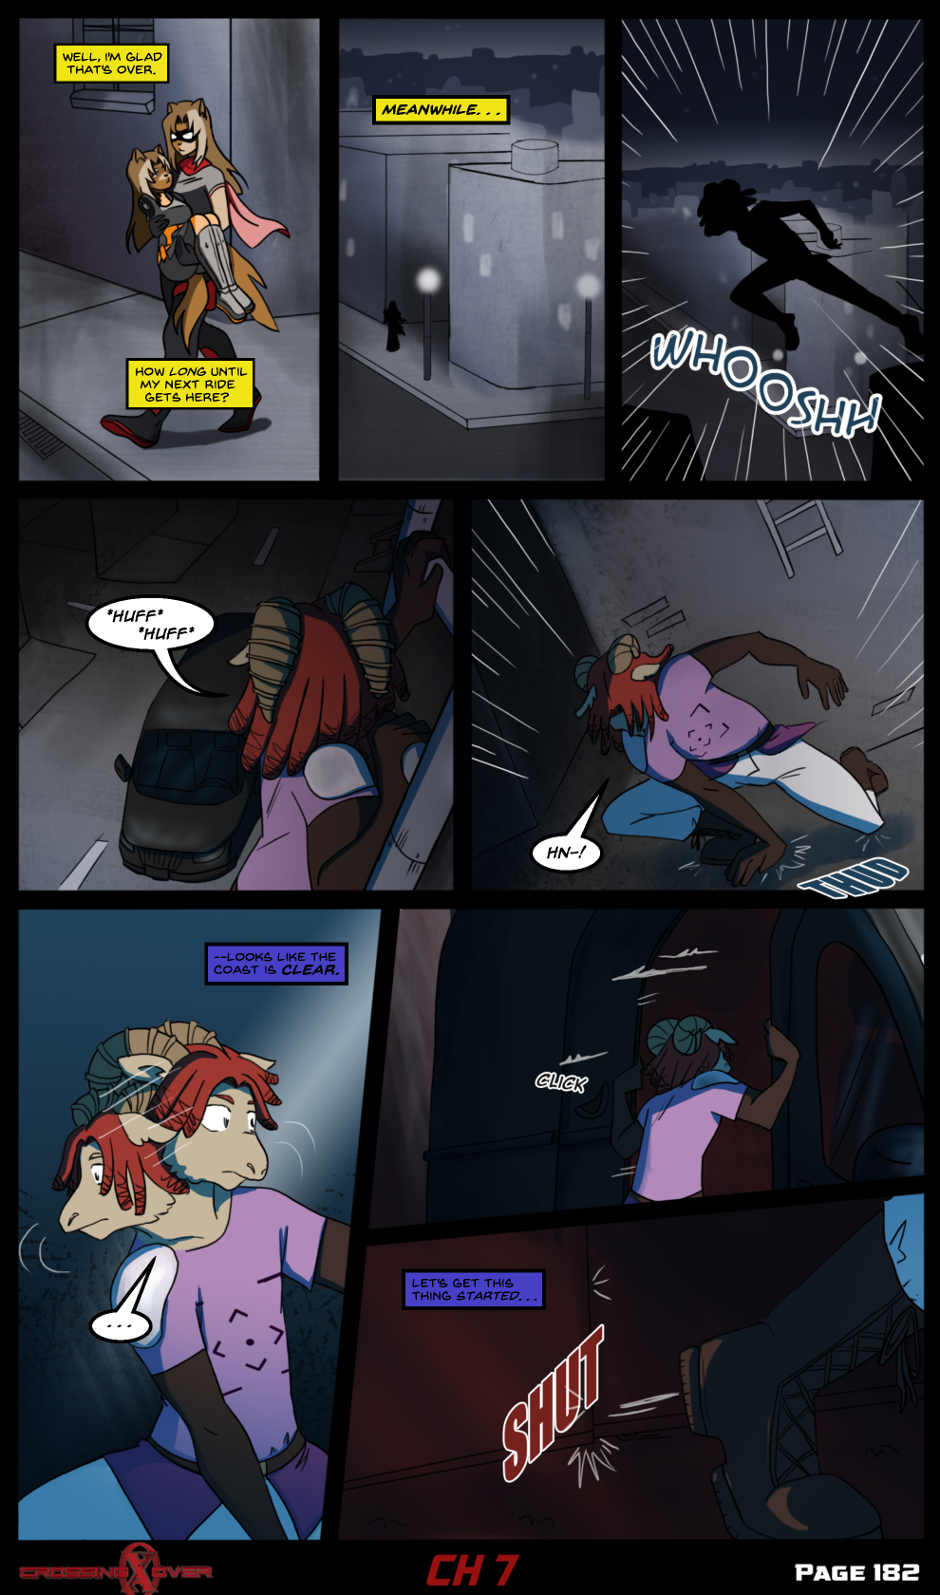 Page 182 (Ch 7)